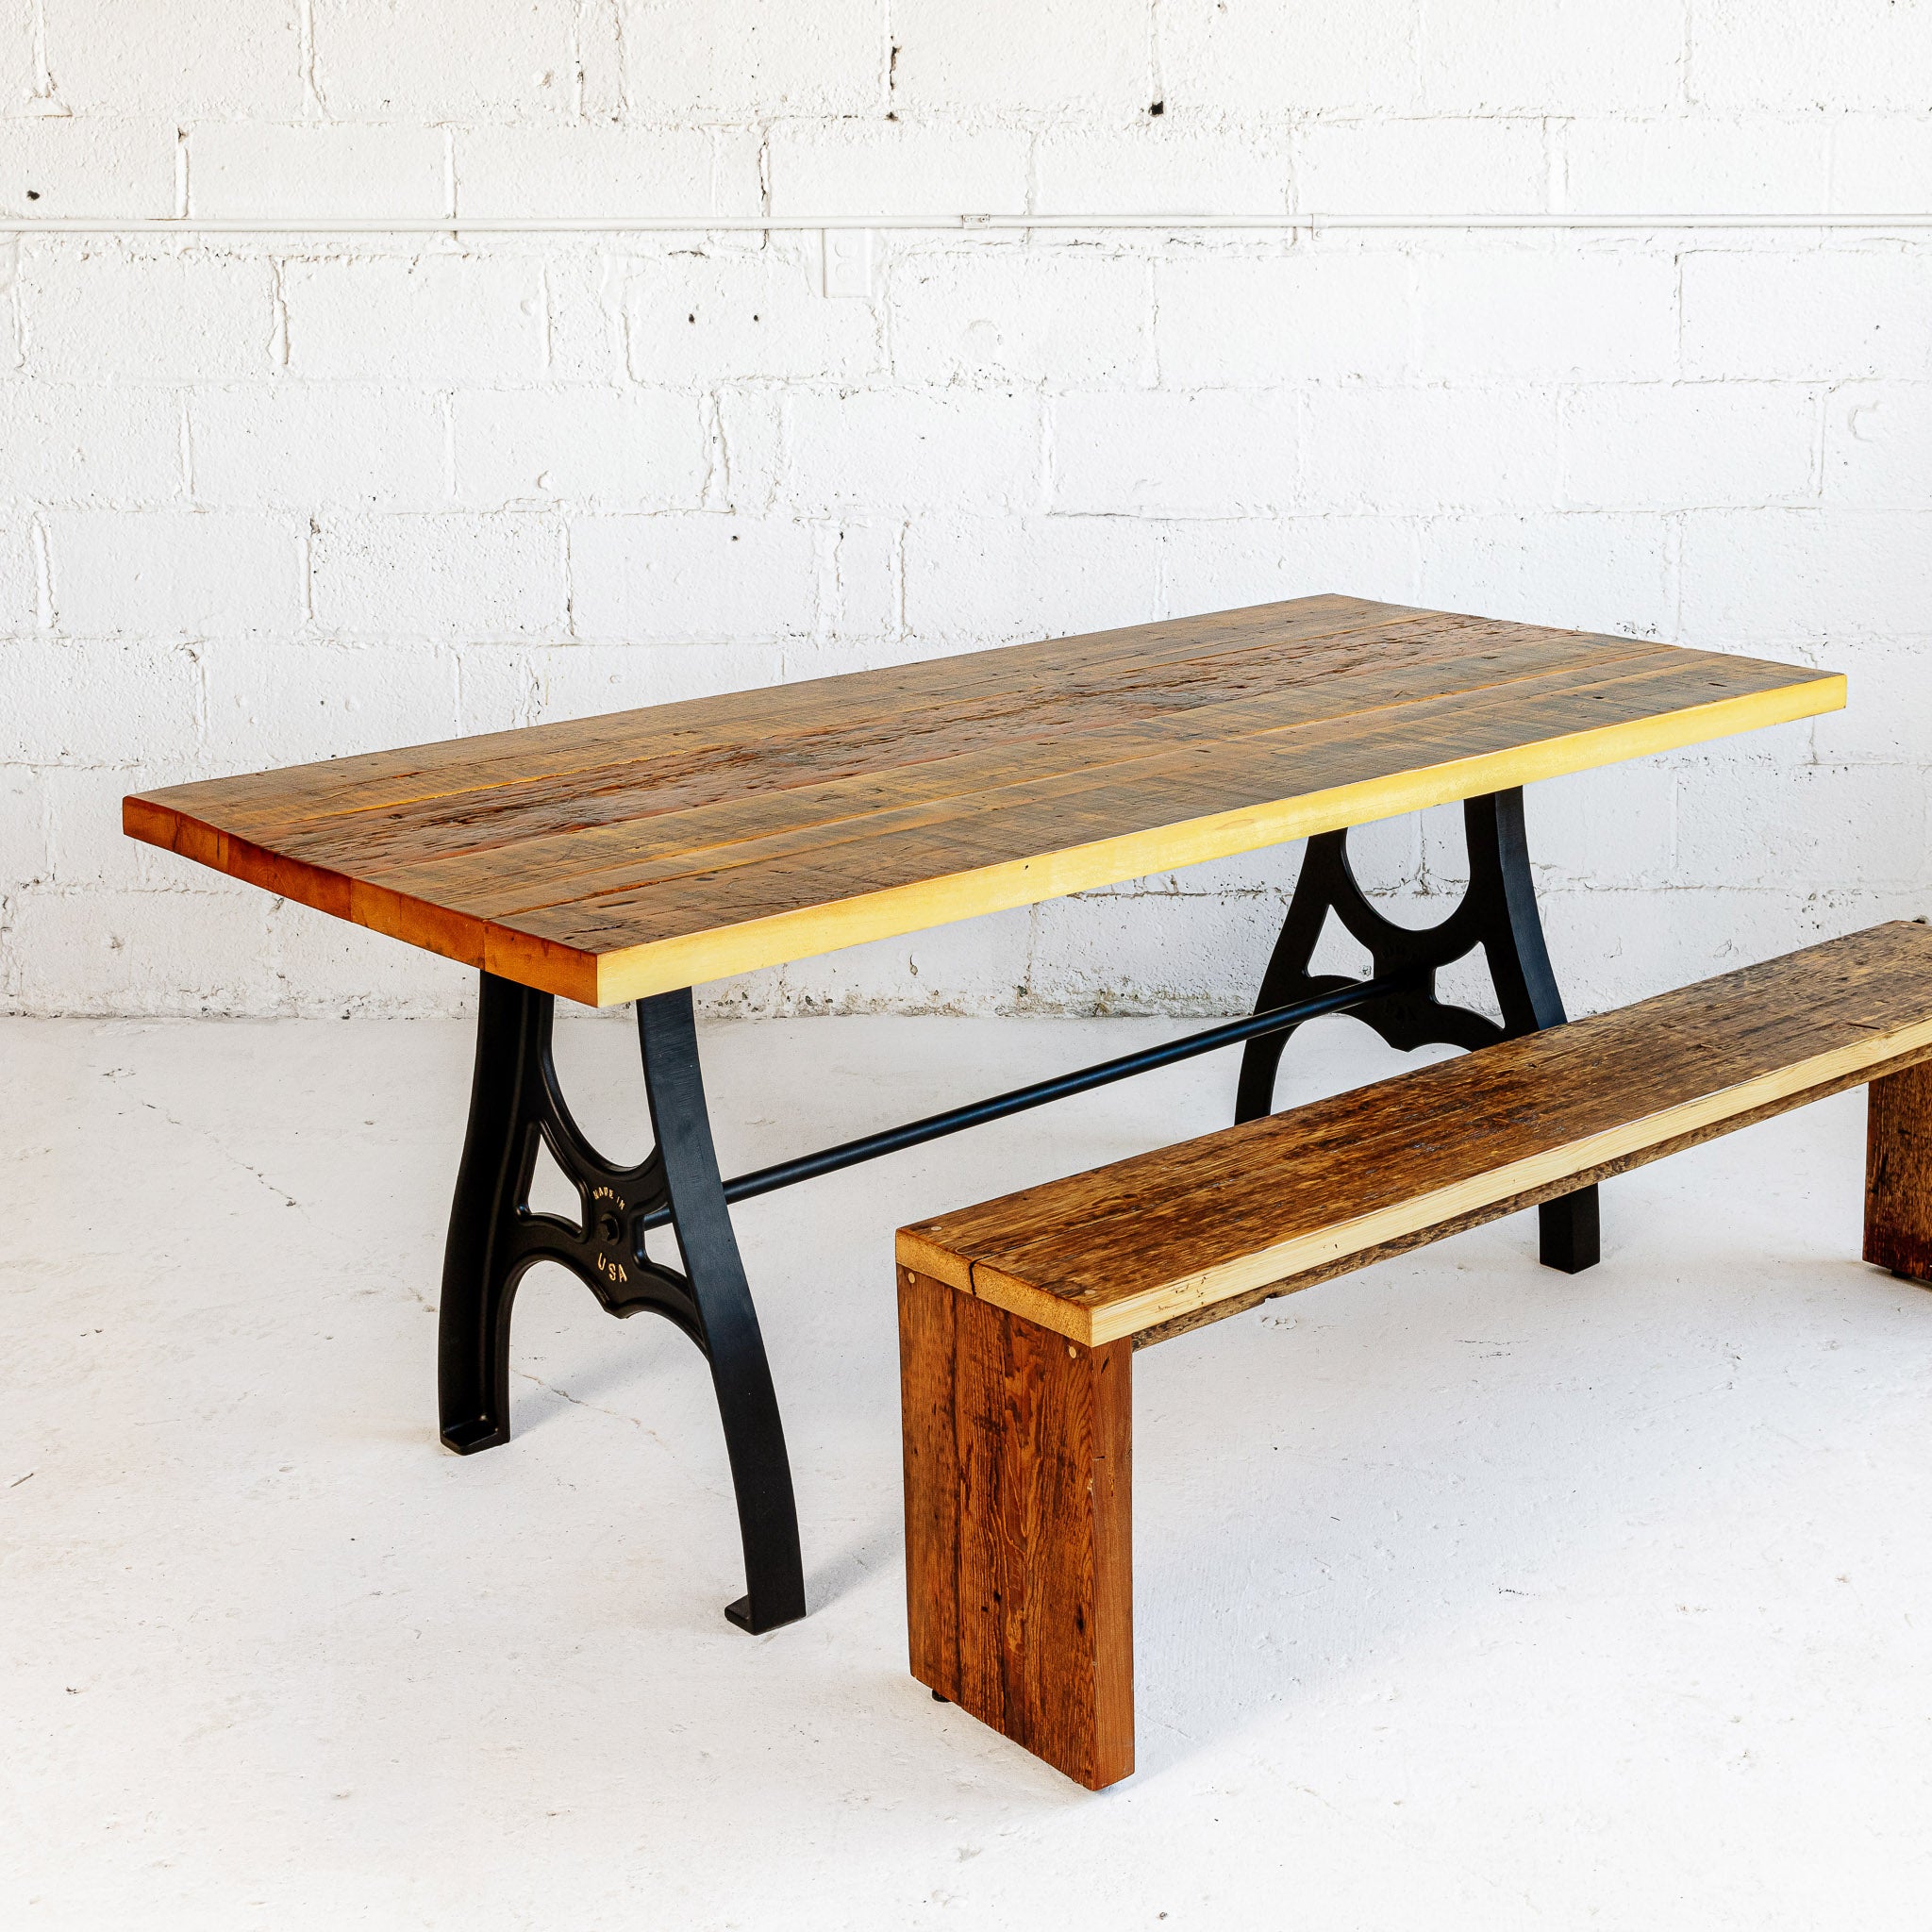 Ella Dining Table with Ella Bench Full view all reclaimed wood